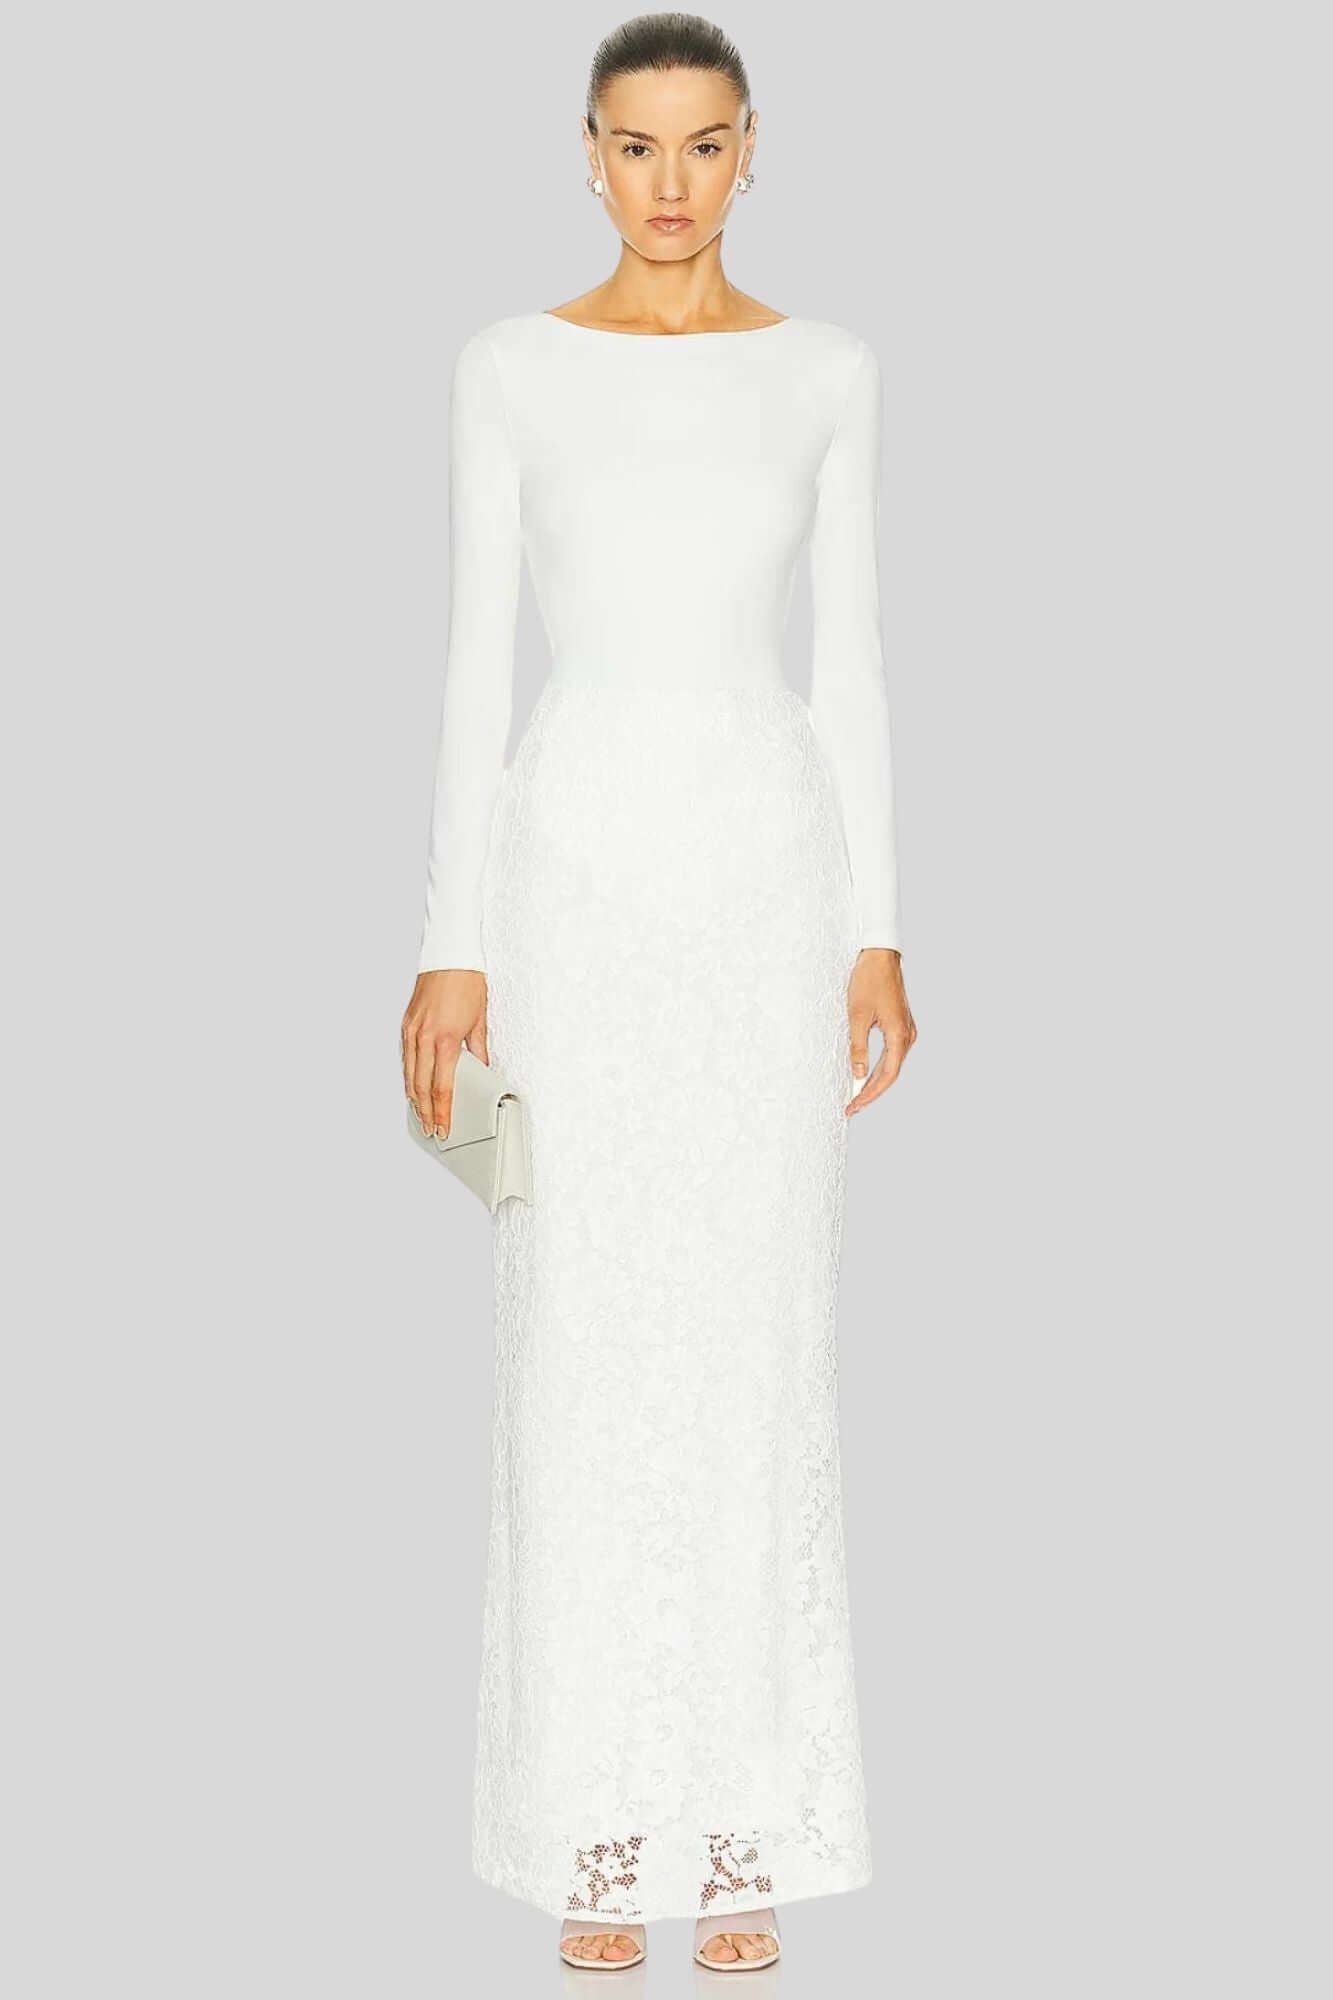 Sans Faff Florence Maxi Skirt in White